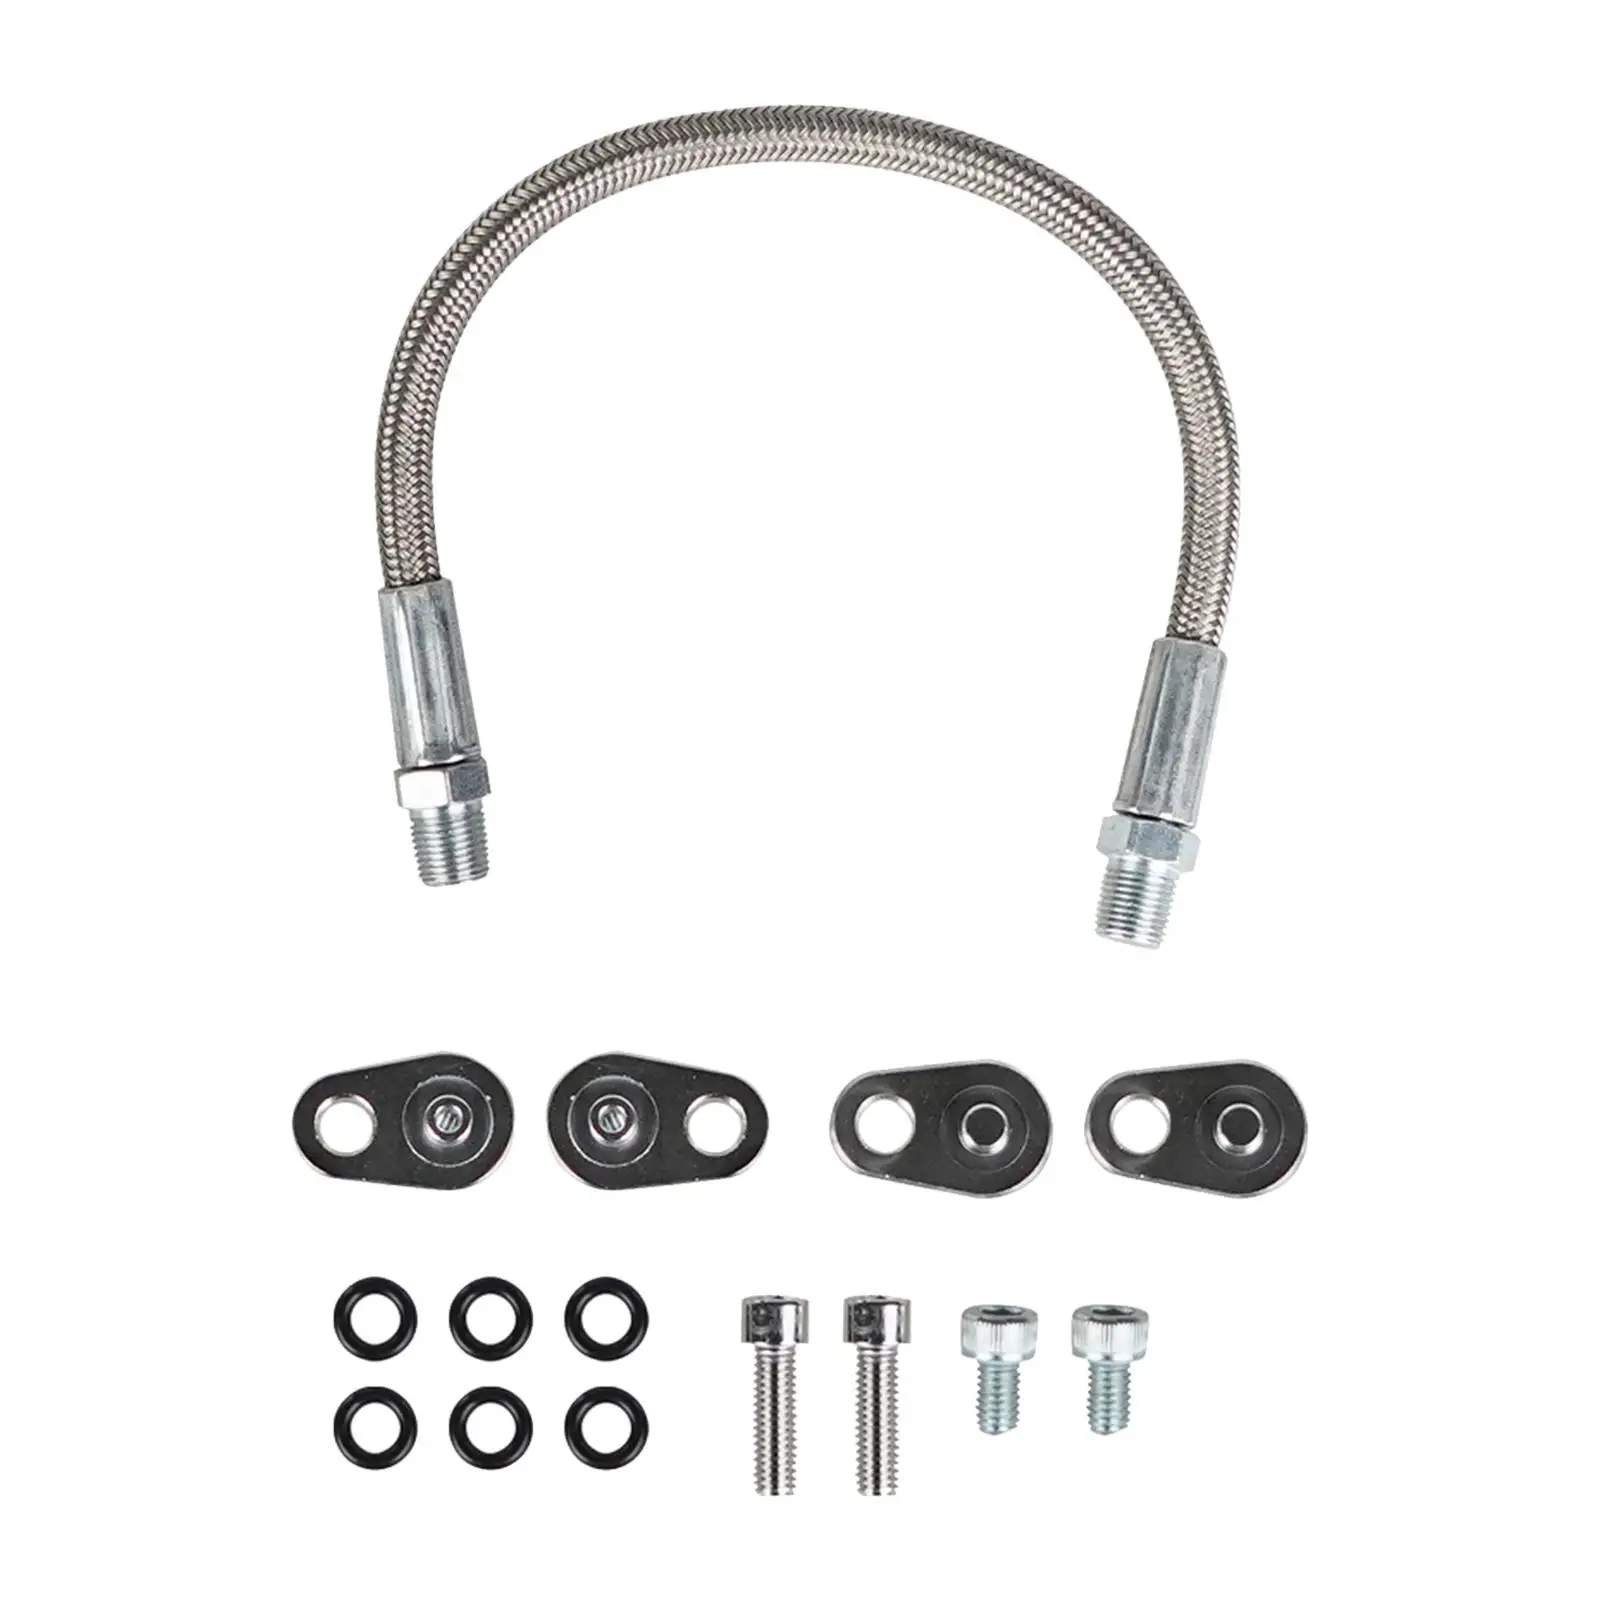 Coolant Steam Crossover Hose Auto Accessories Aluminum Alloy Direct Replace Steam Port Kits for GM LS Series Engines